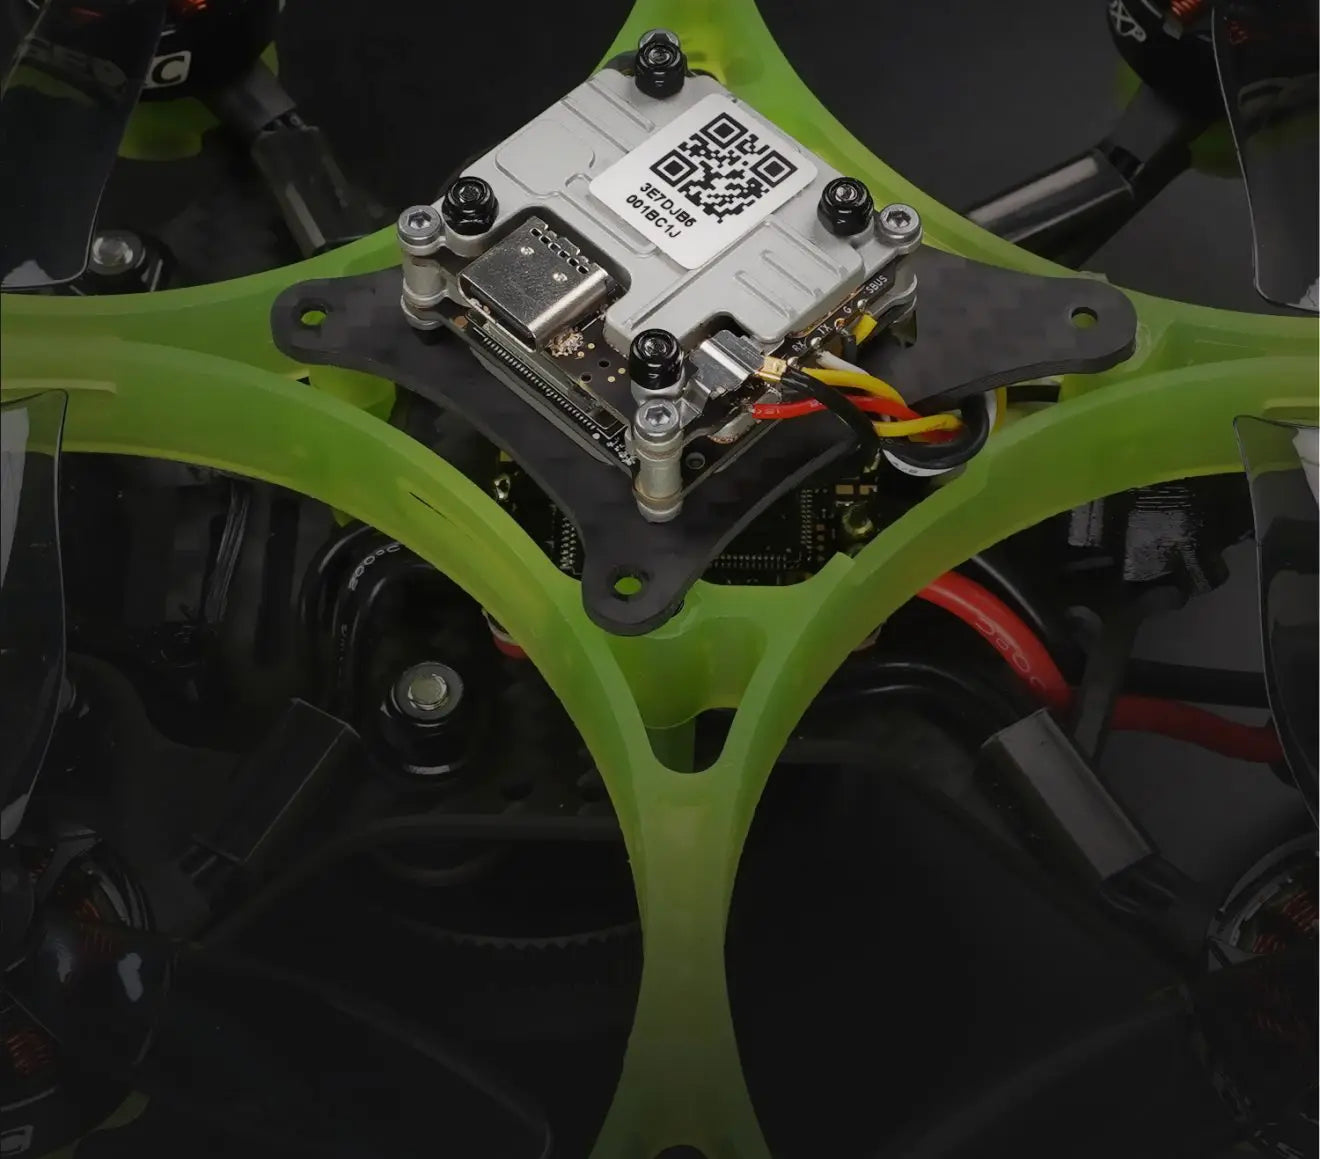 GEPRC CineLog35 FPV Drone, the CineLog35 Performance is also equipped with excellent and affordable GEPRC ELRS 